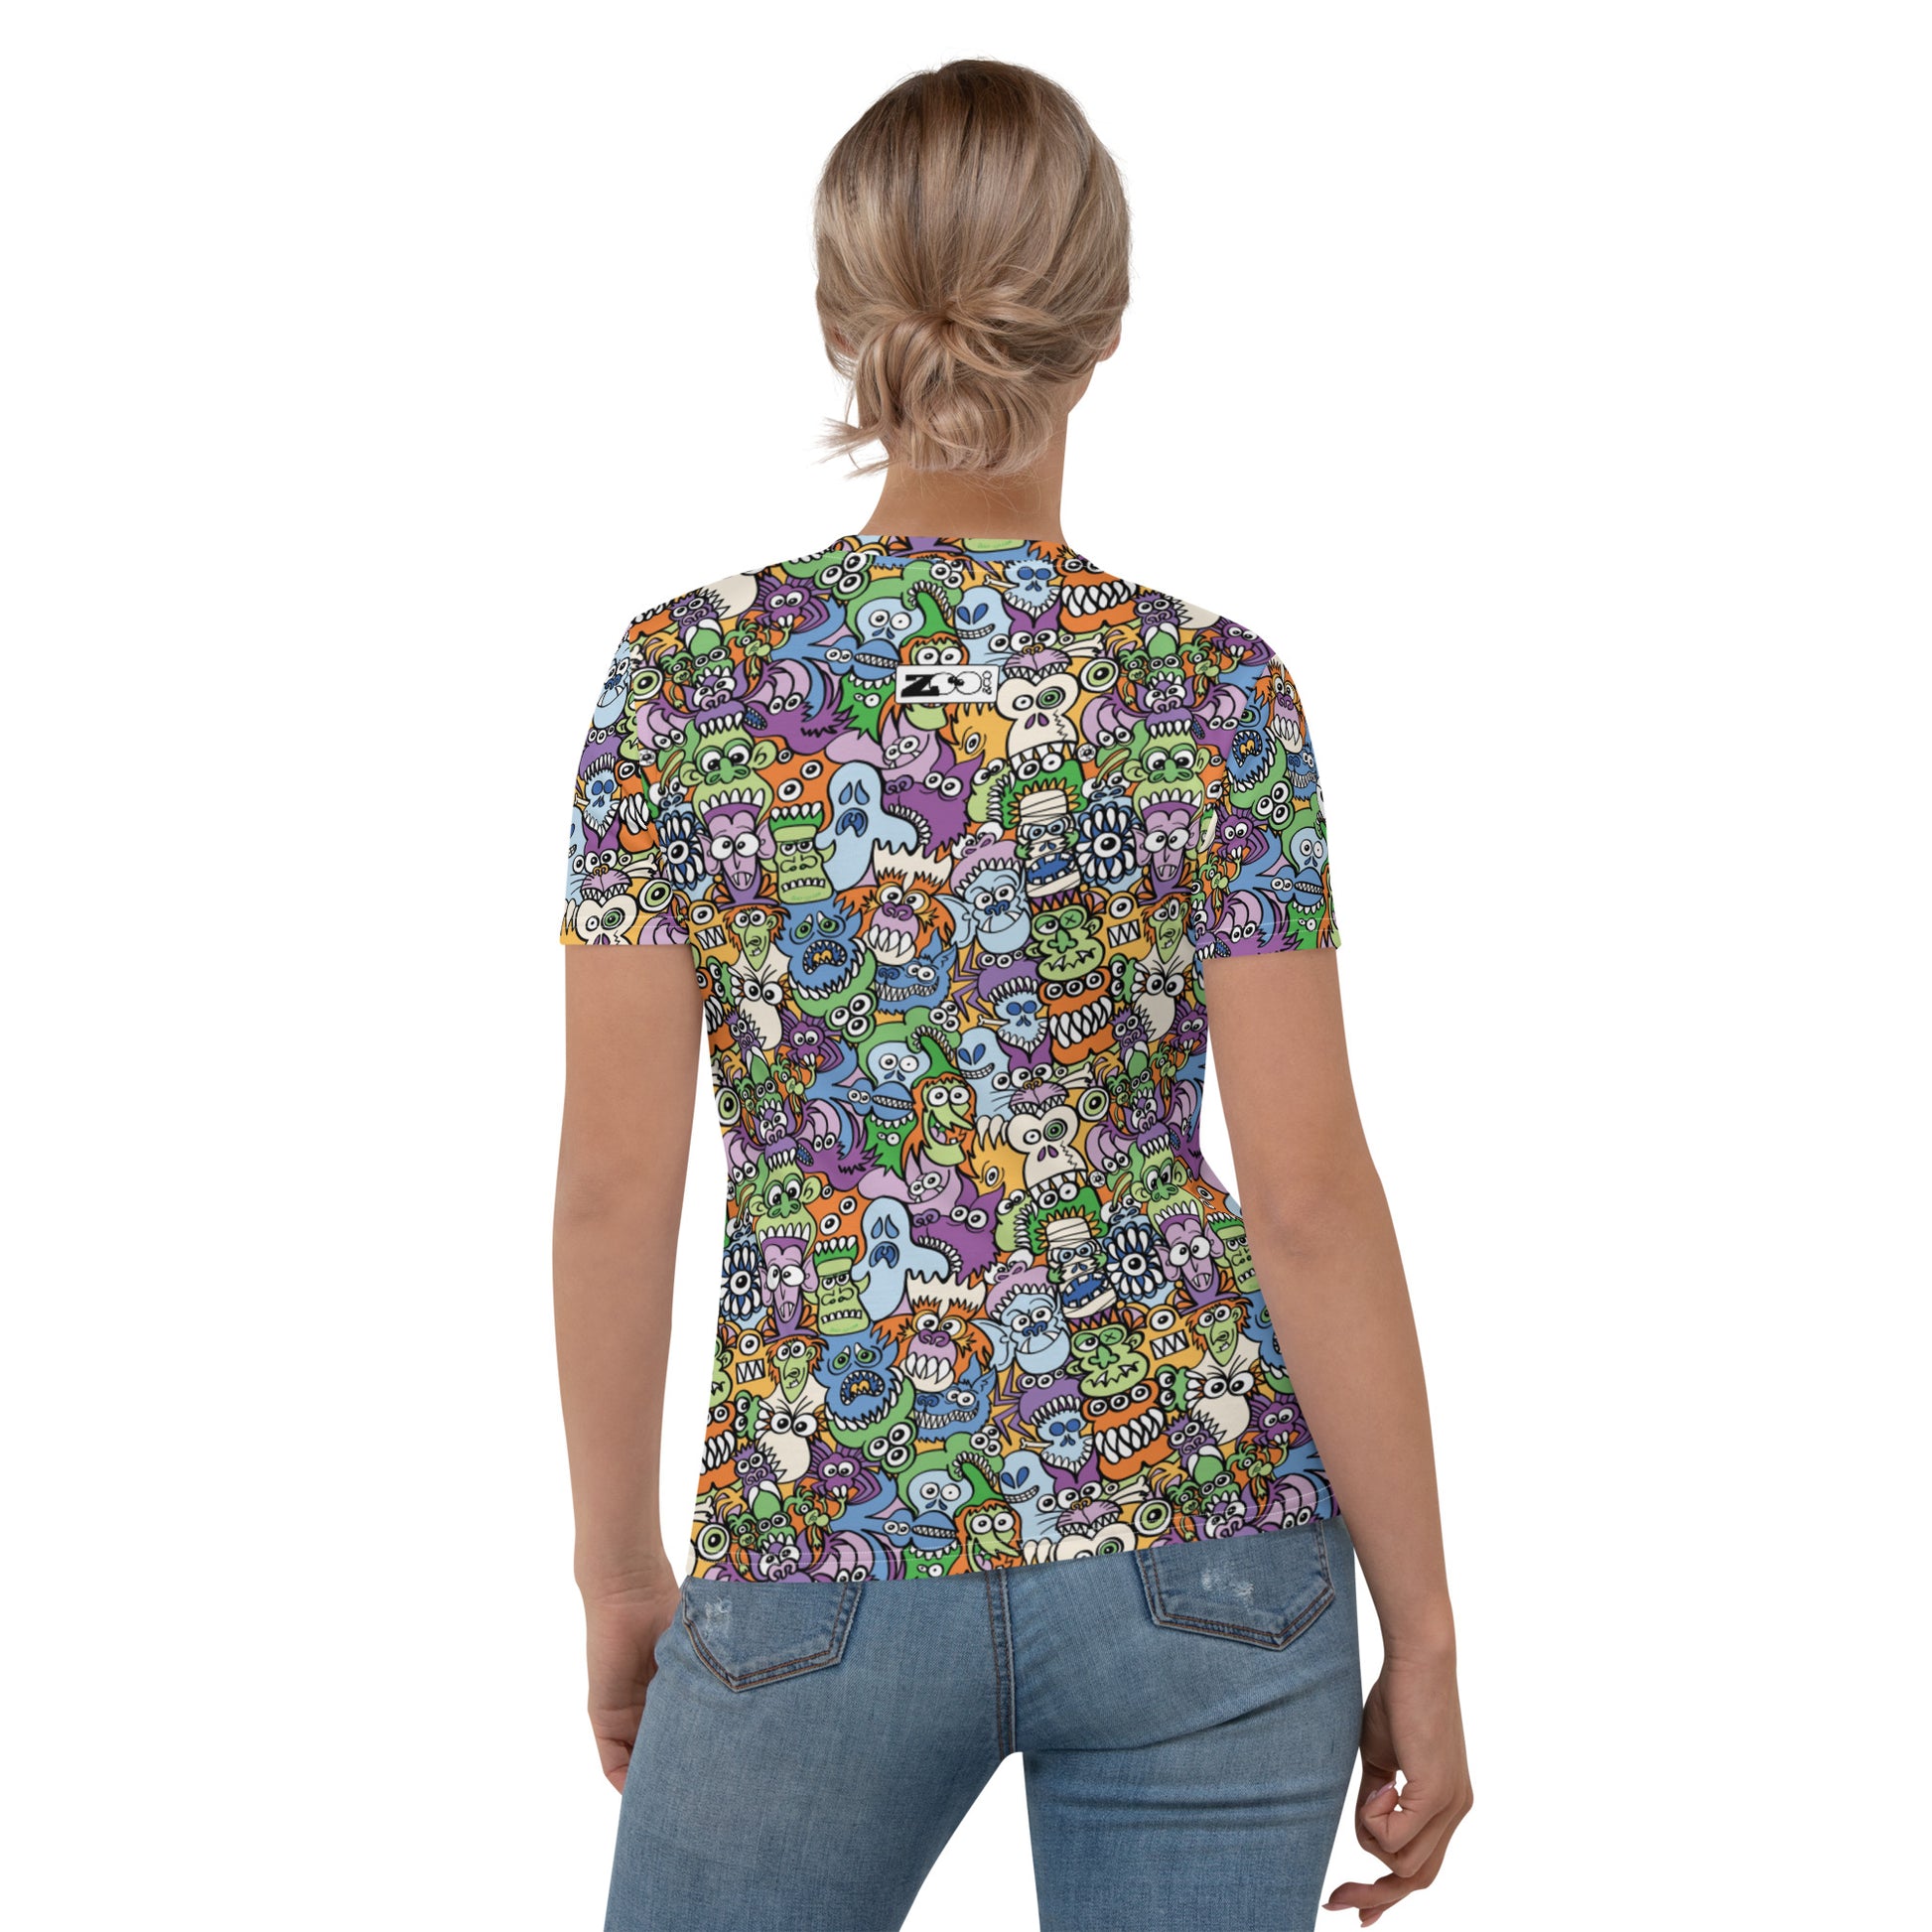 All the spooky Halloween monsters in a pattern design Women's T-shirt. Back view